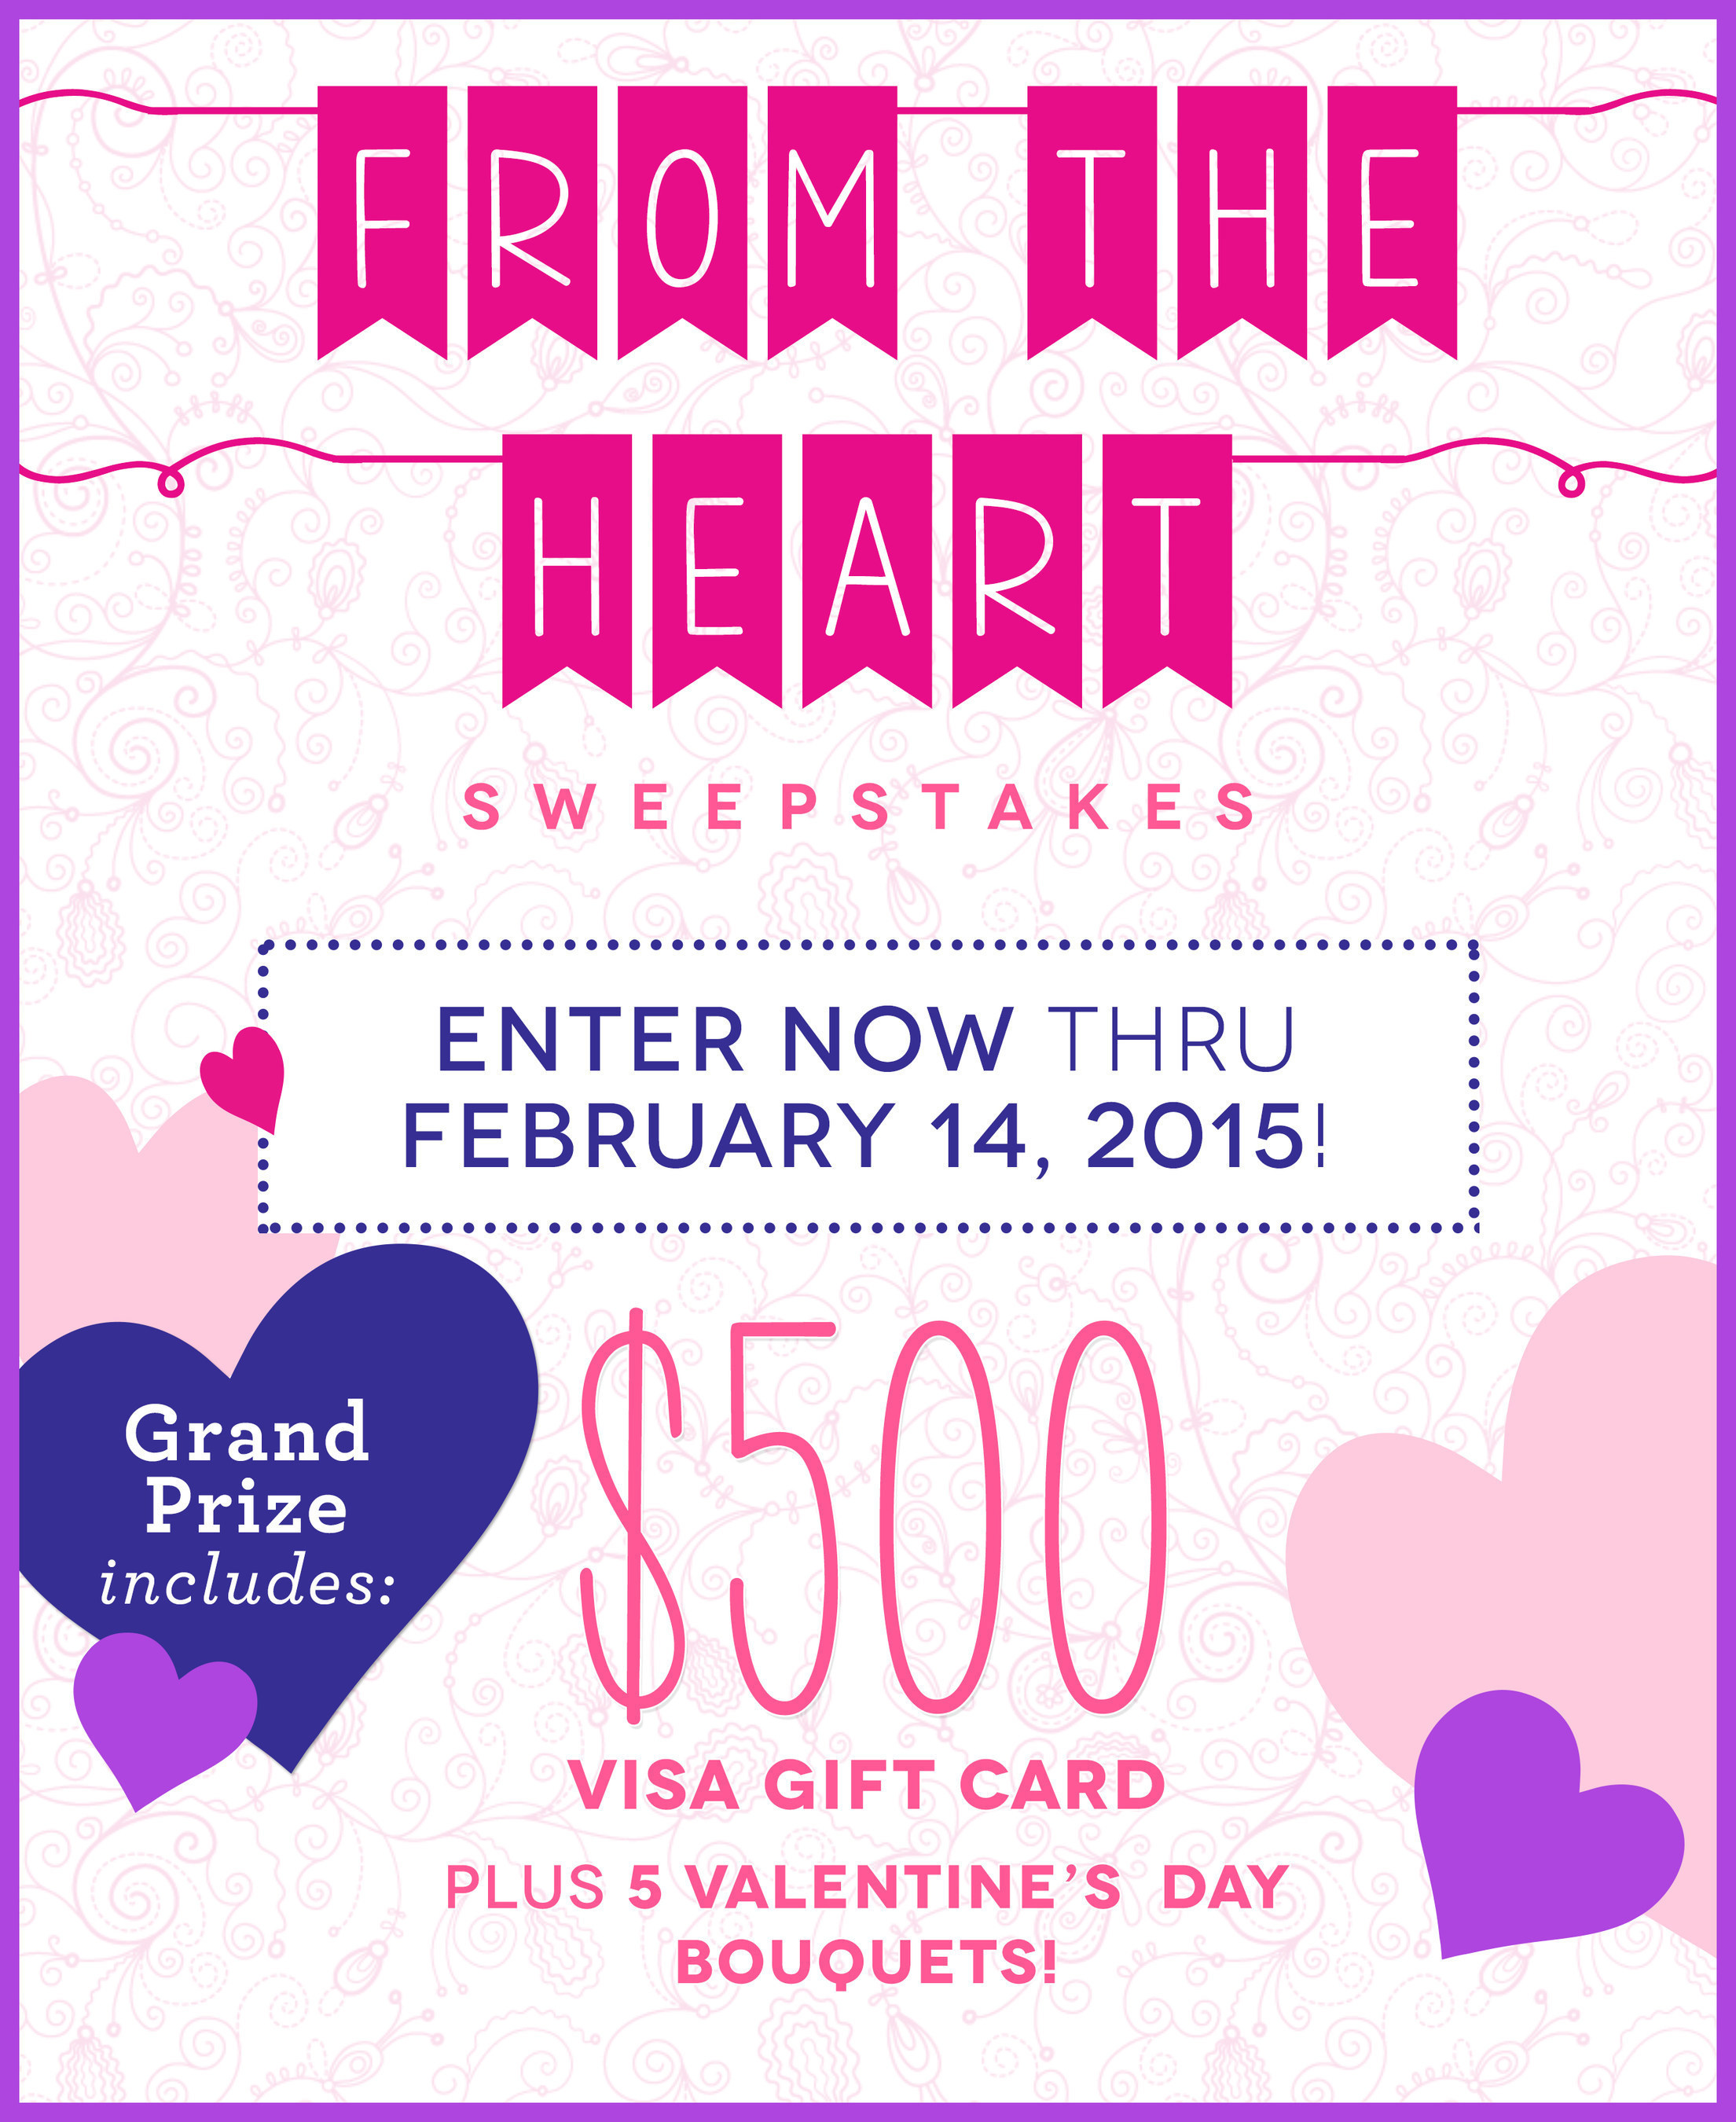 Send Flowers Celebrates Valentine's Day With Visa Gift Card & Floral Bouquets Sweepstakes